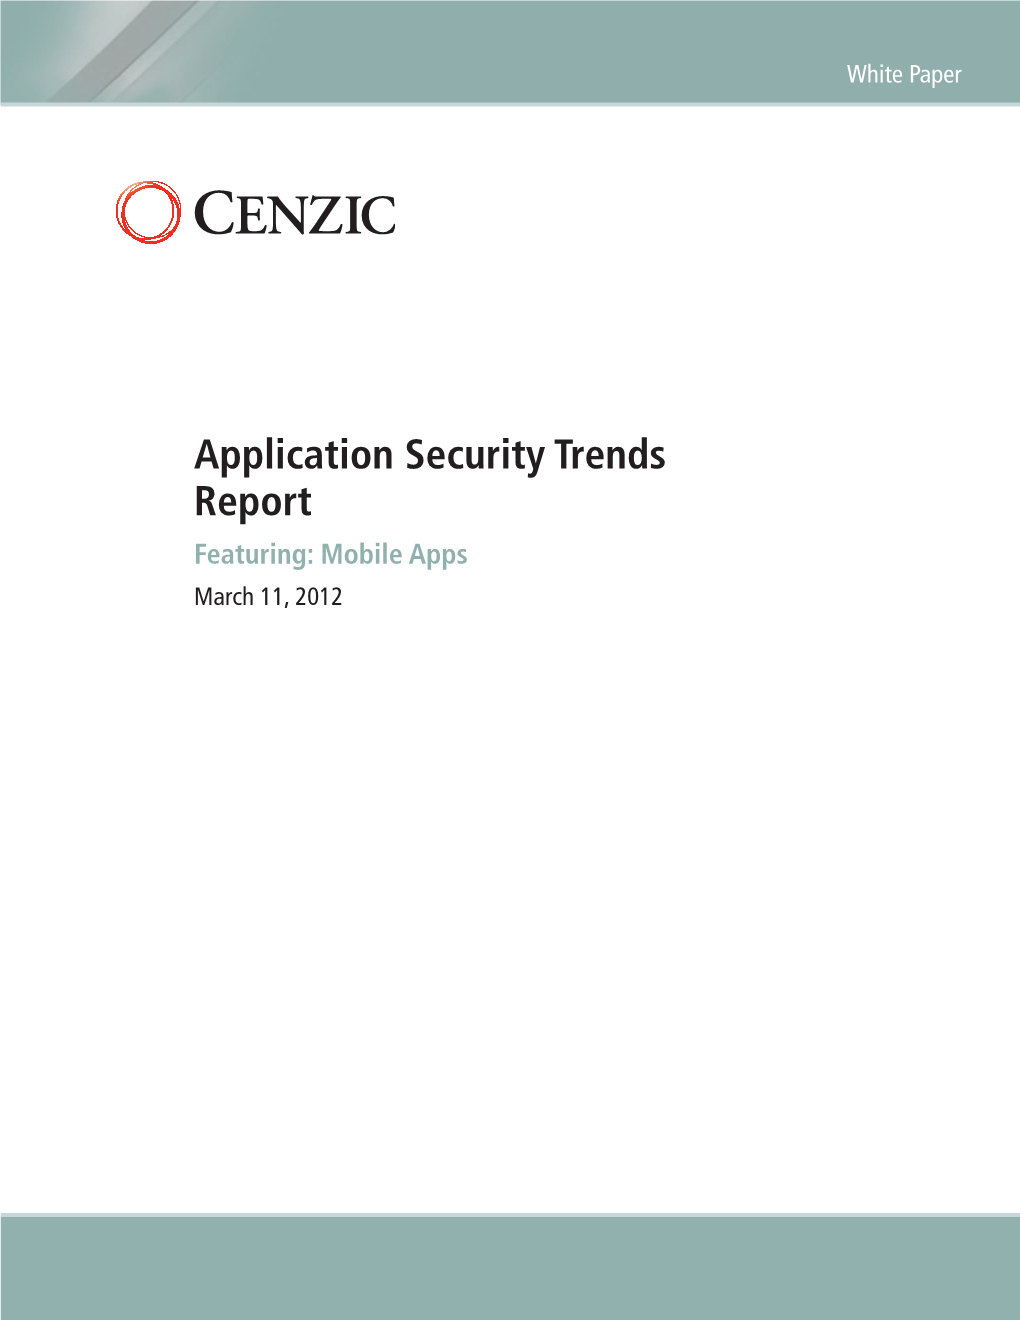 Application Security Trends Report Featuring: Mobile Apps March 11, 2012 White Paper Application Security Trends Report